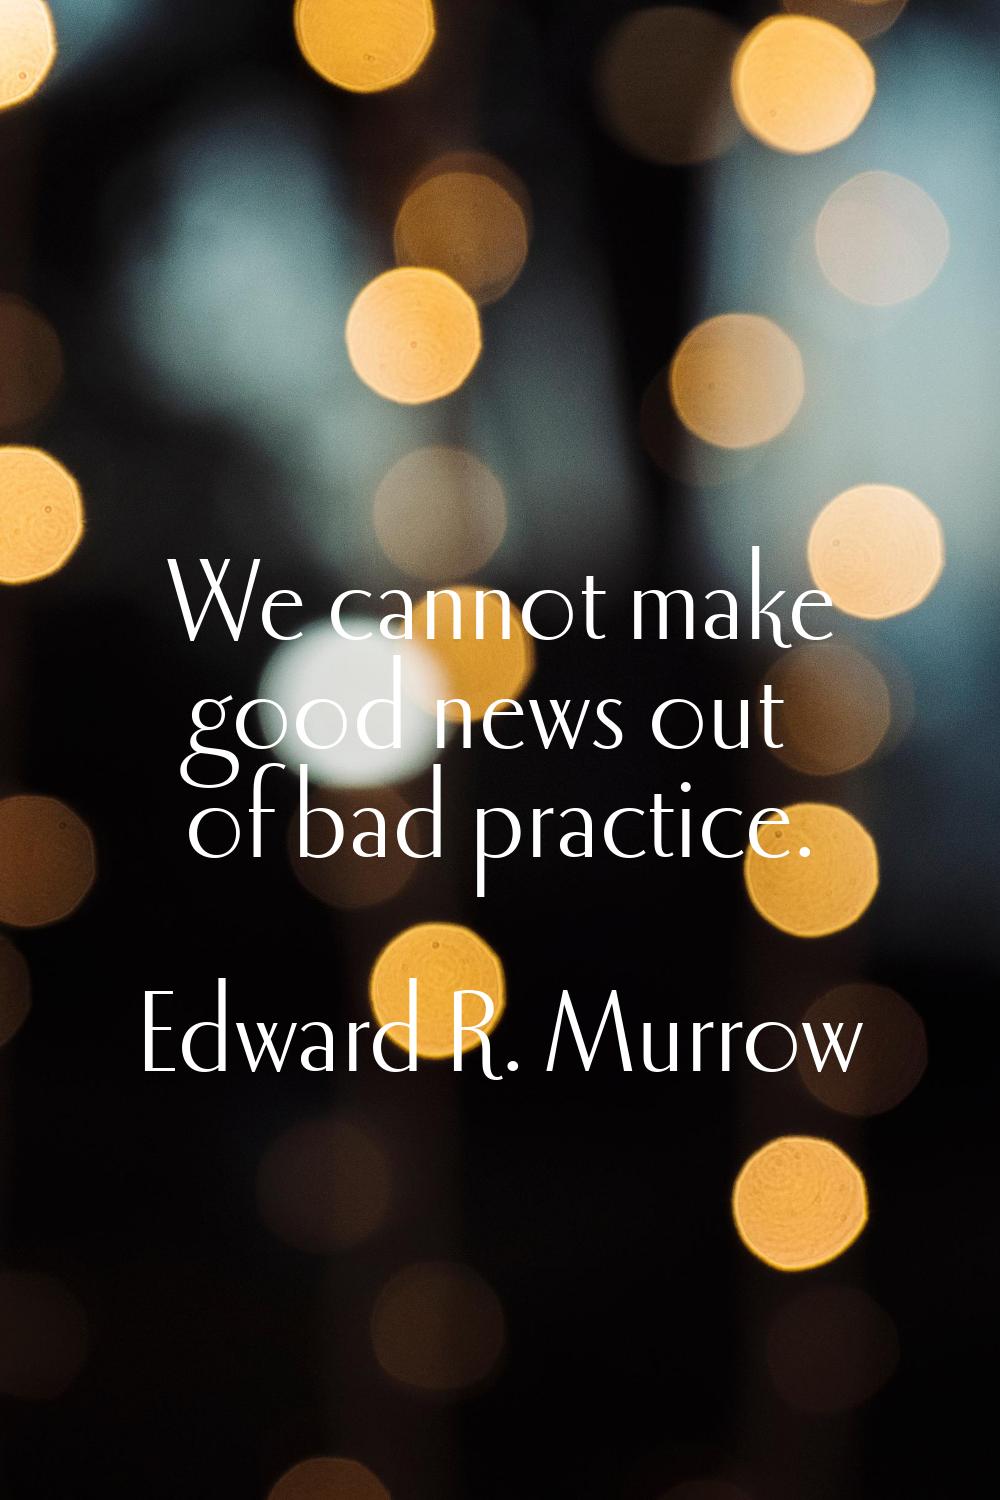 We cannot make good news out of bad practice.